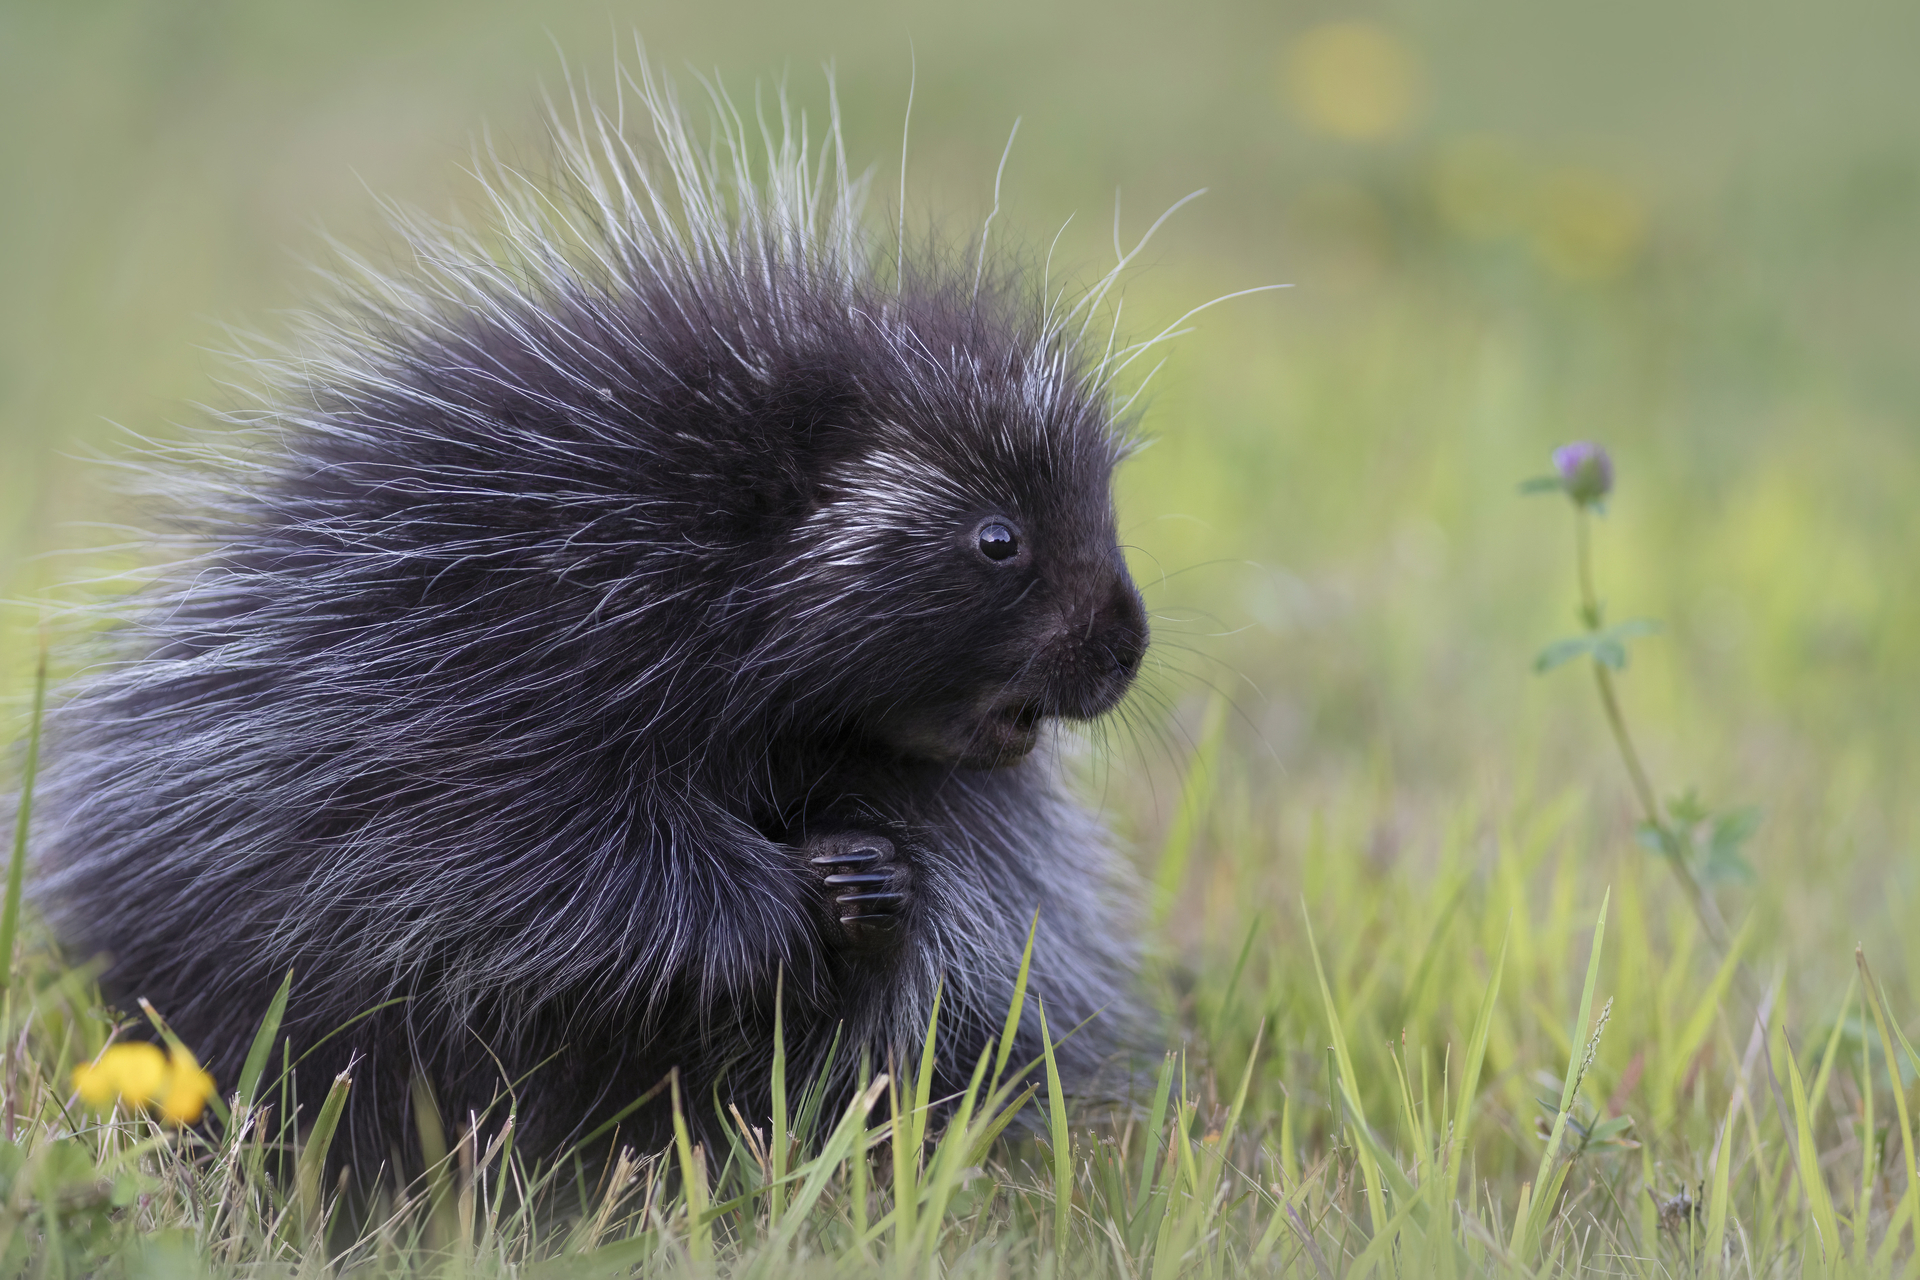 A porcupine on the grass holding its front two hands together.